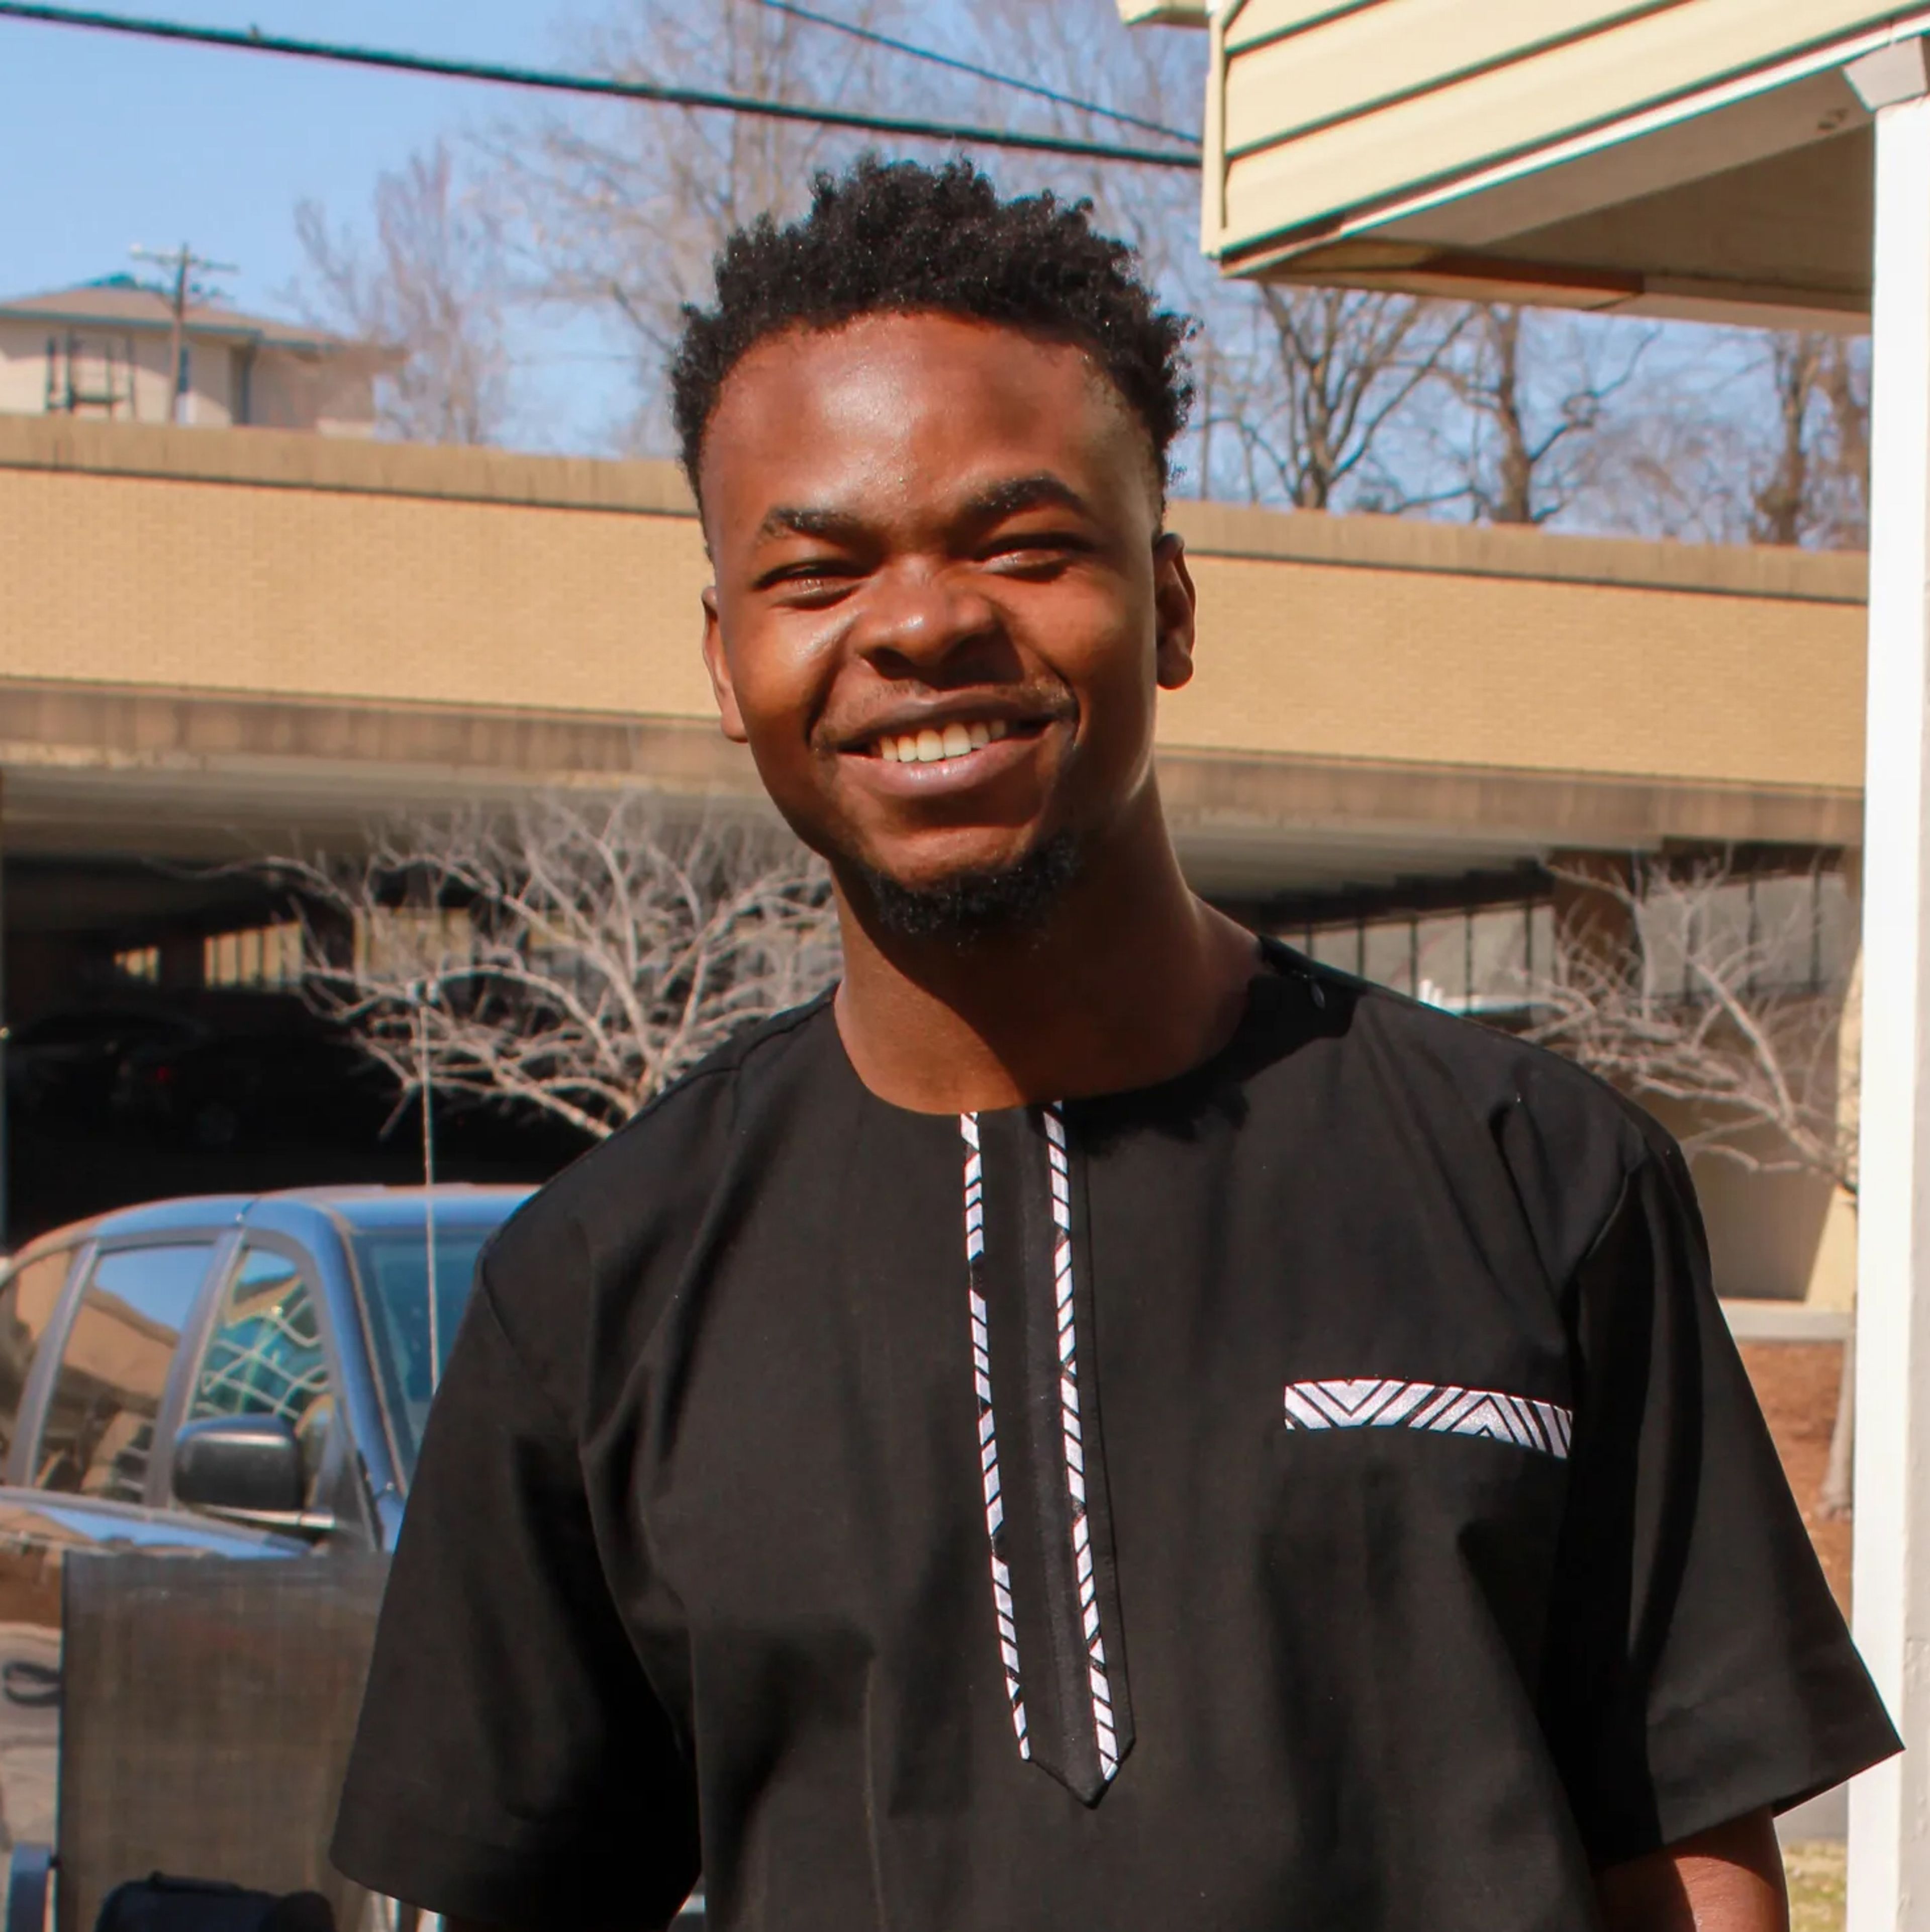 Zimbabwean SEMO student Chris Furusa provides nourishment and friendship for community through traditional African food - home hero image